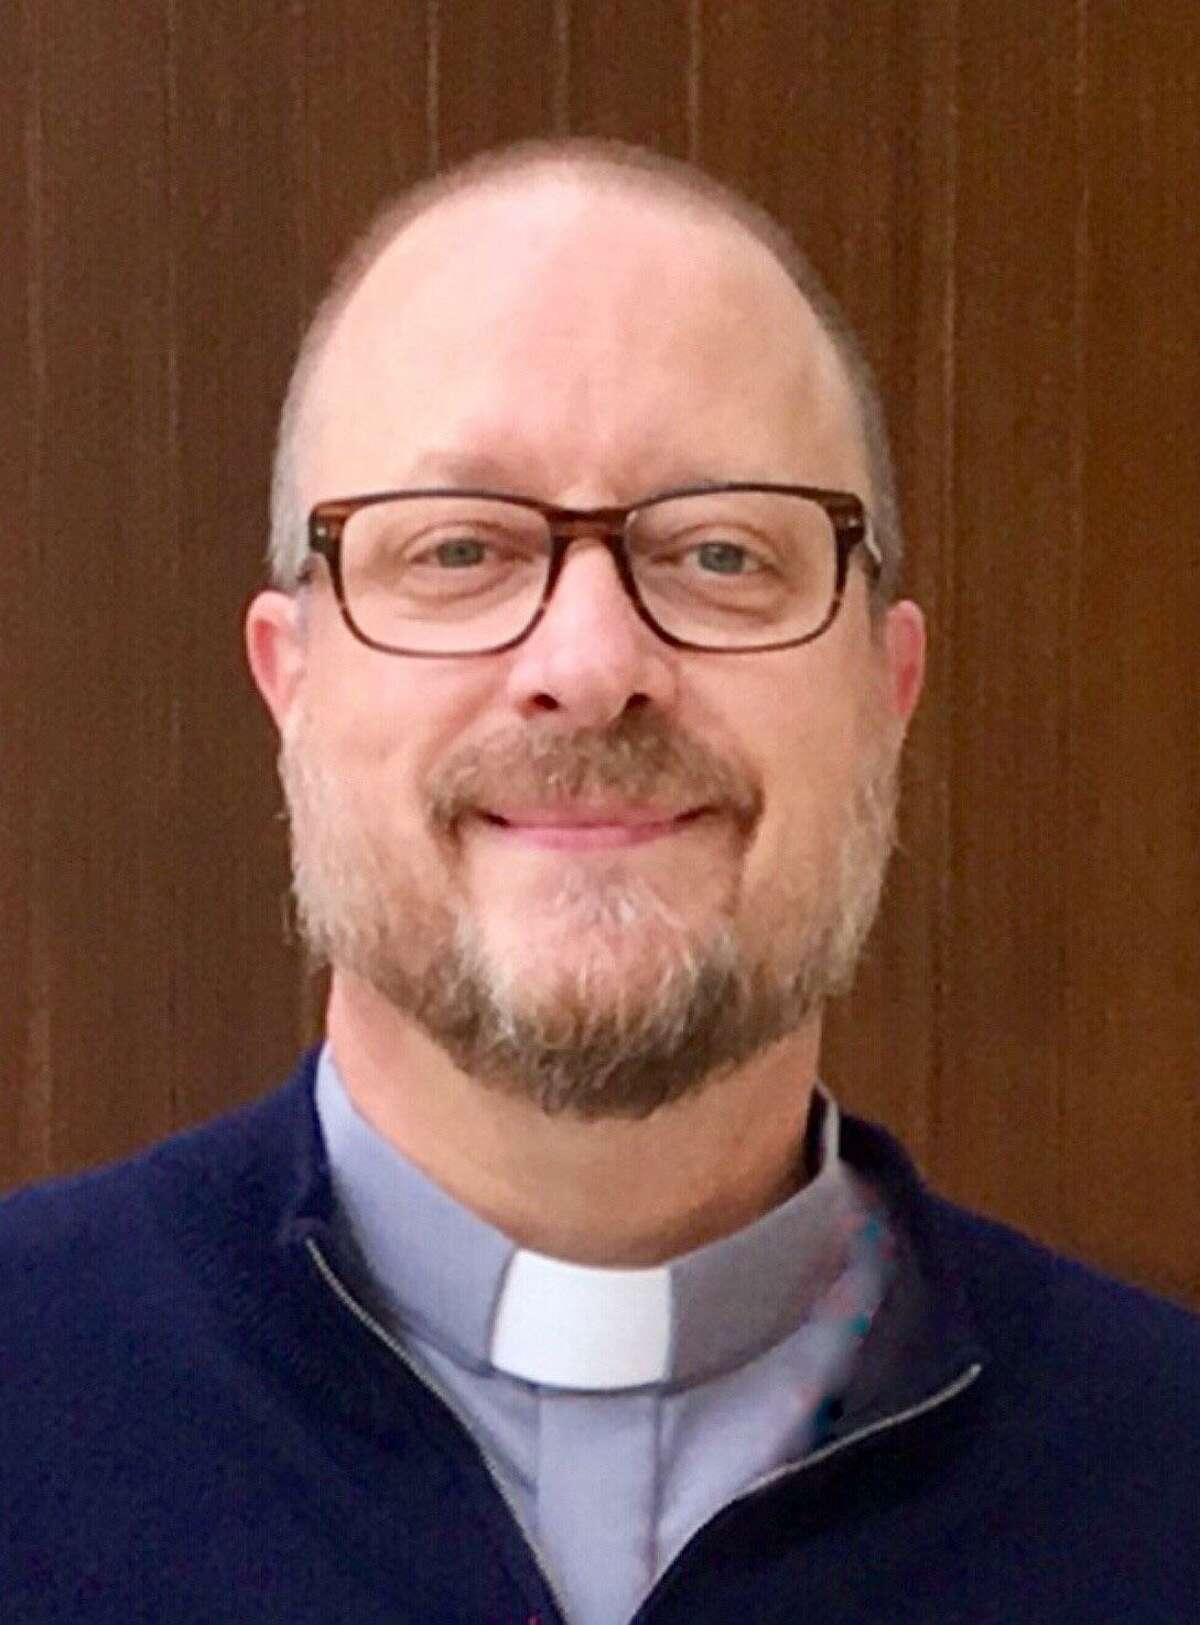 The Rev. Arthur Mollenhauer is pastor at St. Roch?’s Parish in Greenwich in March 2018.